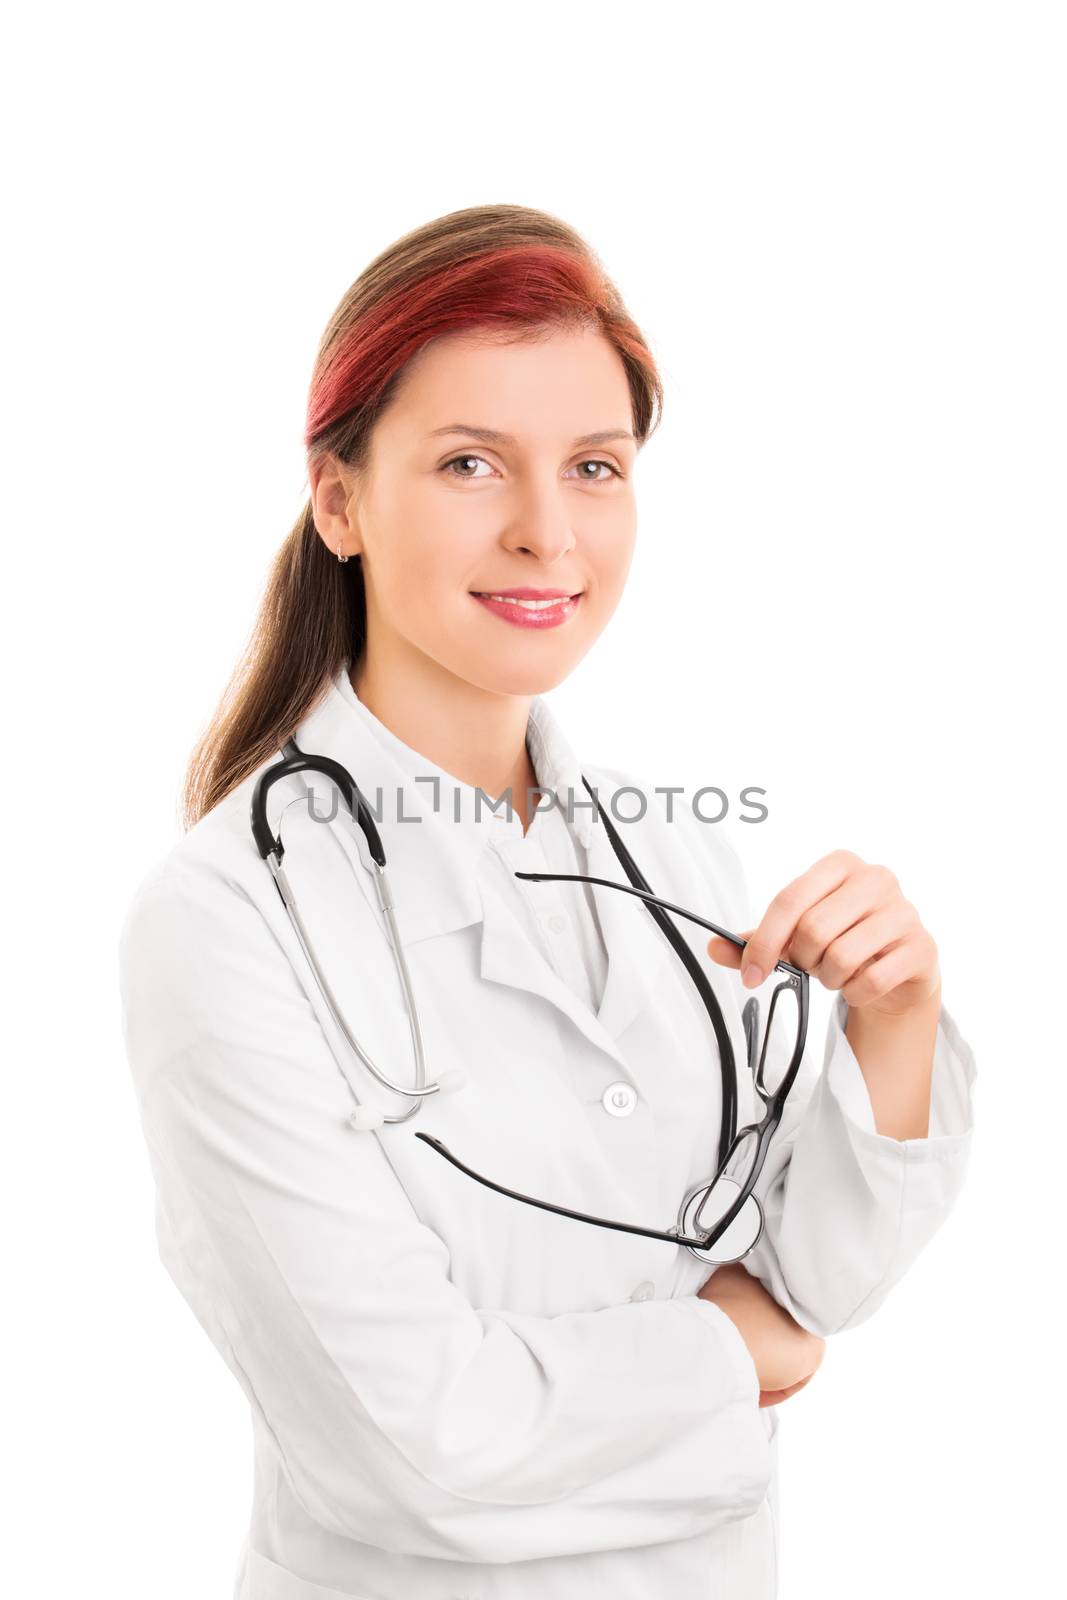 Portrait of a smiling young female health care professional or doctor or nurse with a stethoscope around her neck holding glasses, isolated on white background. Caring and confident face for your health.